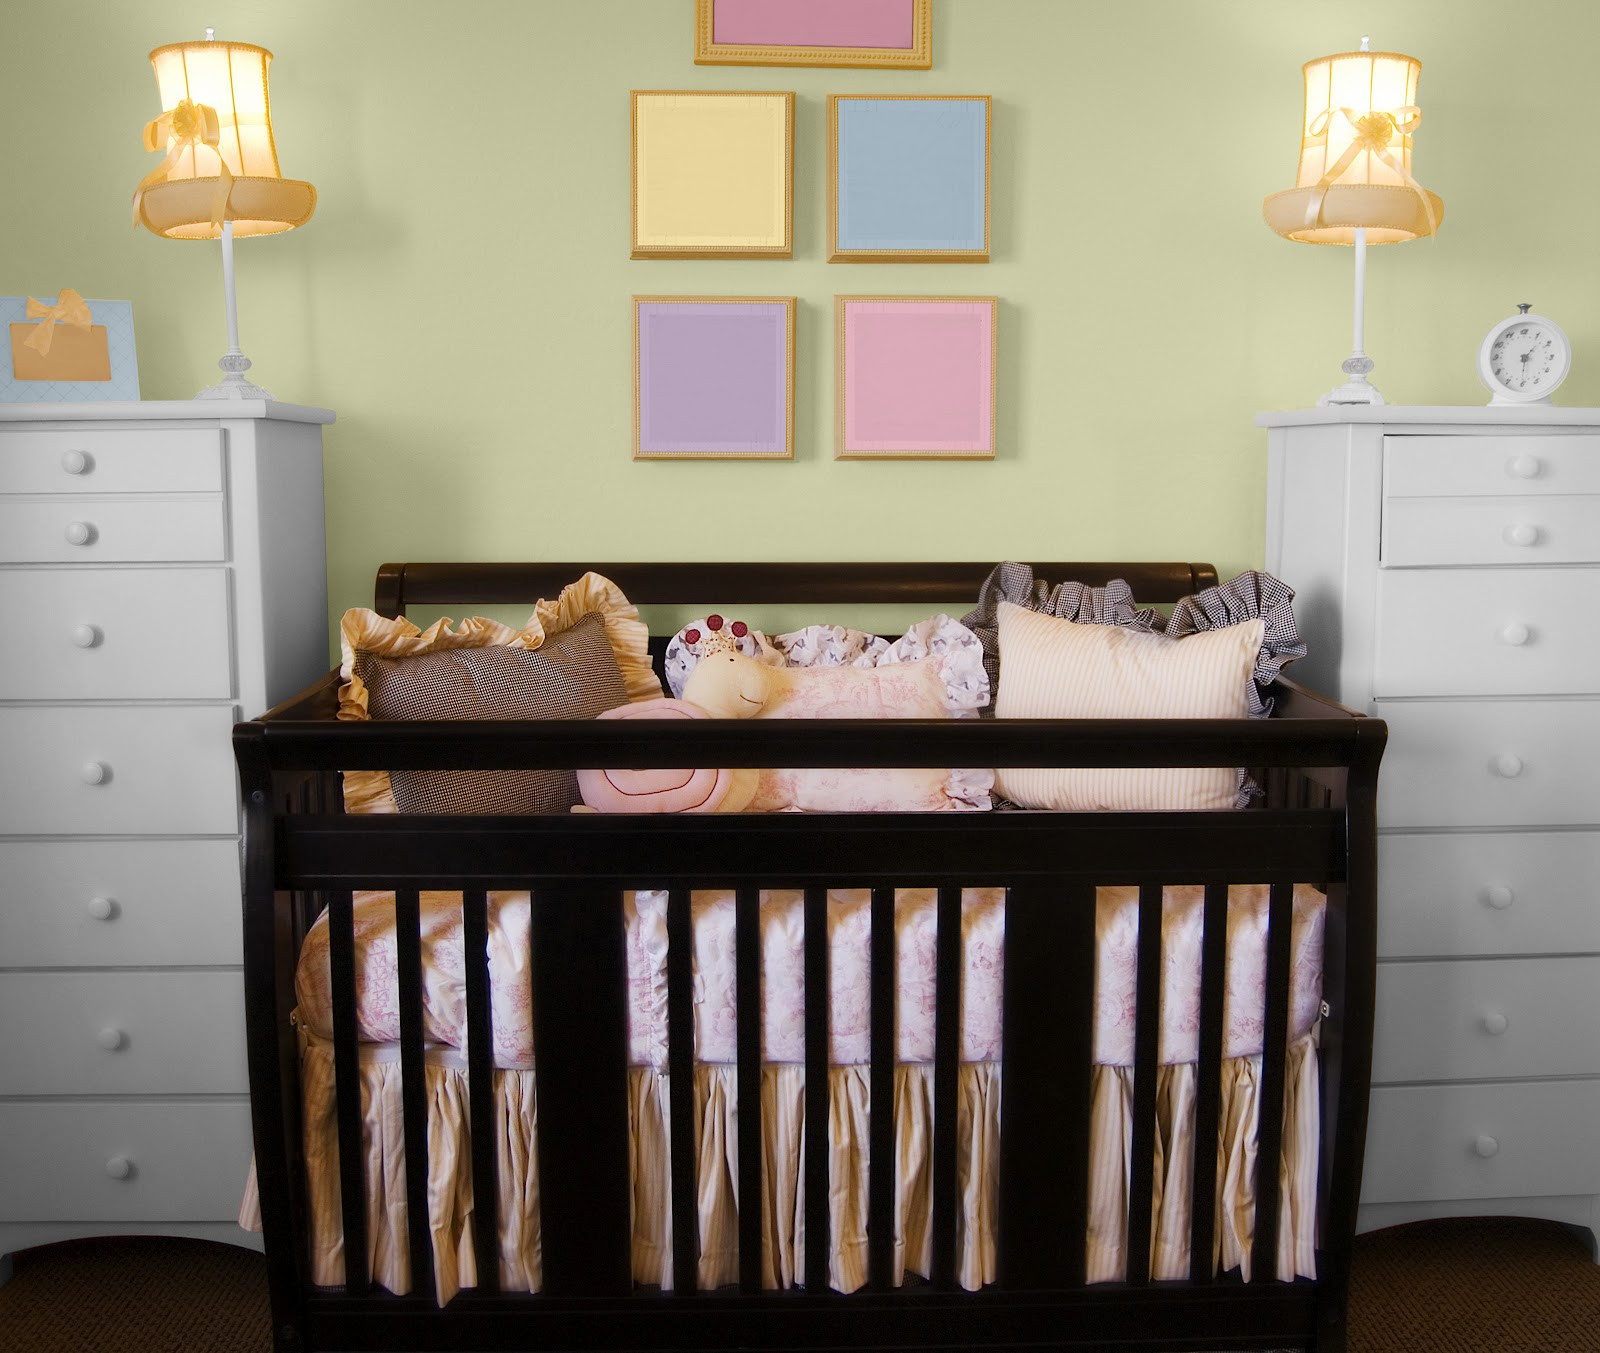 Decoration For Baby Room
 Top 10 Baby Nursery Room Colors And Decorating Ideas